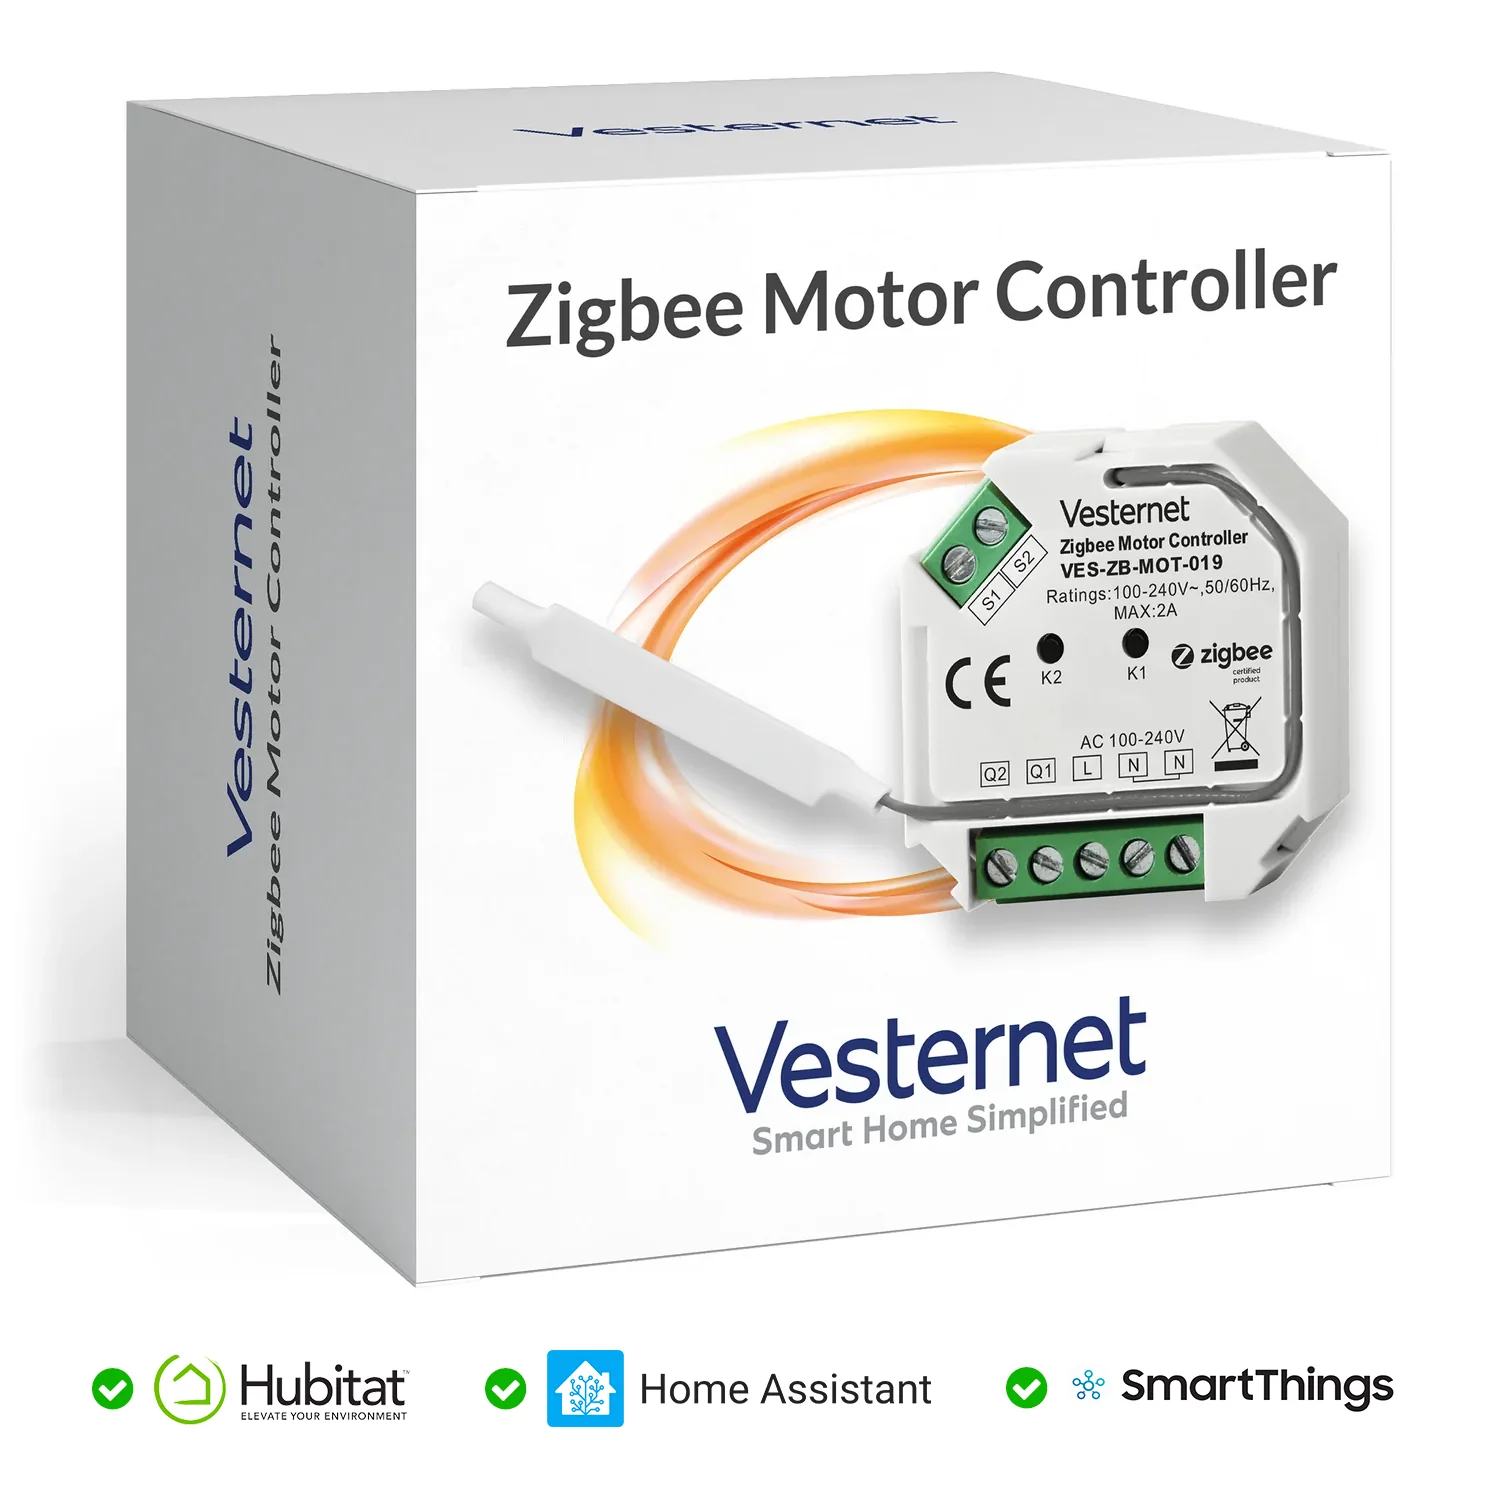 Can I use this module to monitor energy consumption?